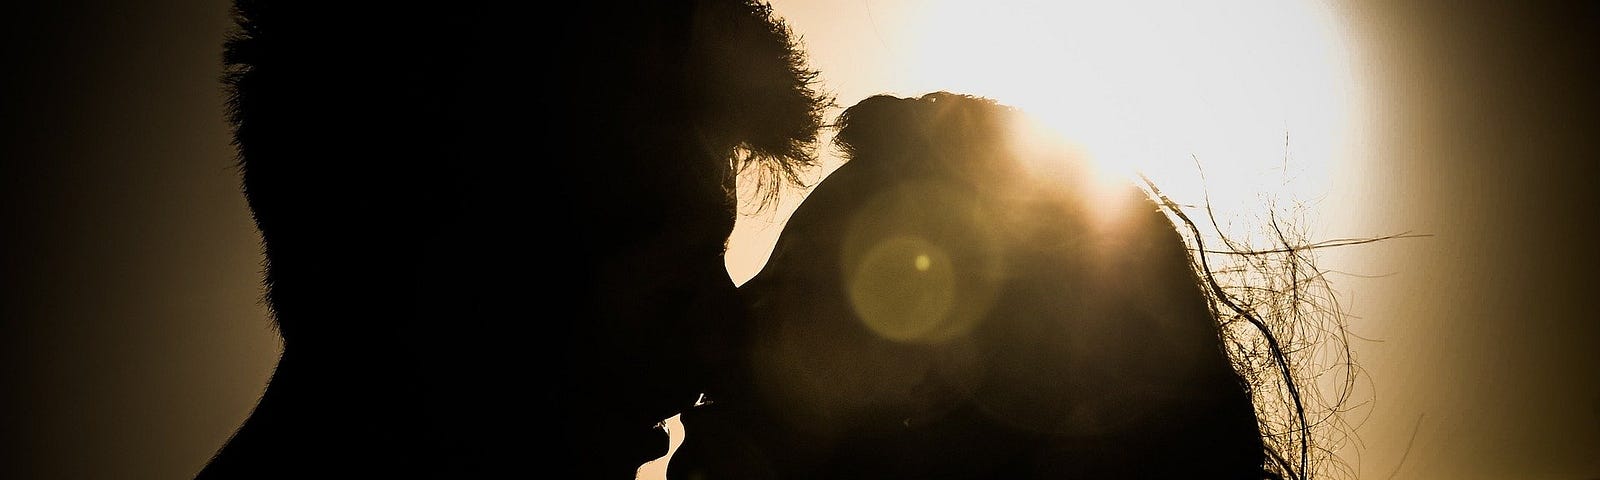 Silhouette of a M/F couple kissing/ in a romantic embrace